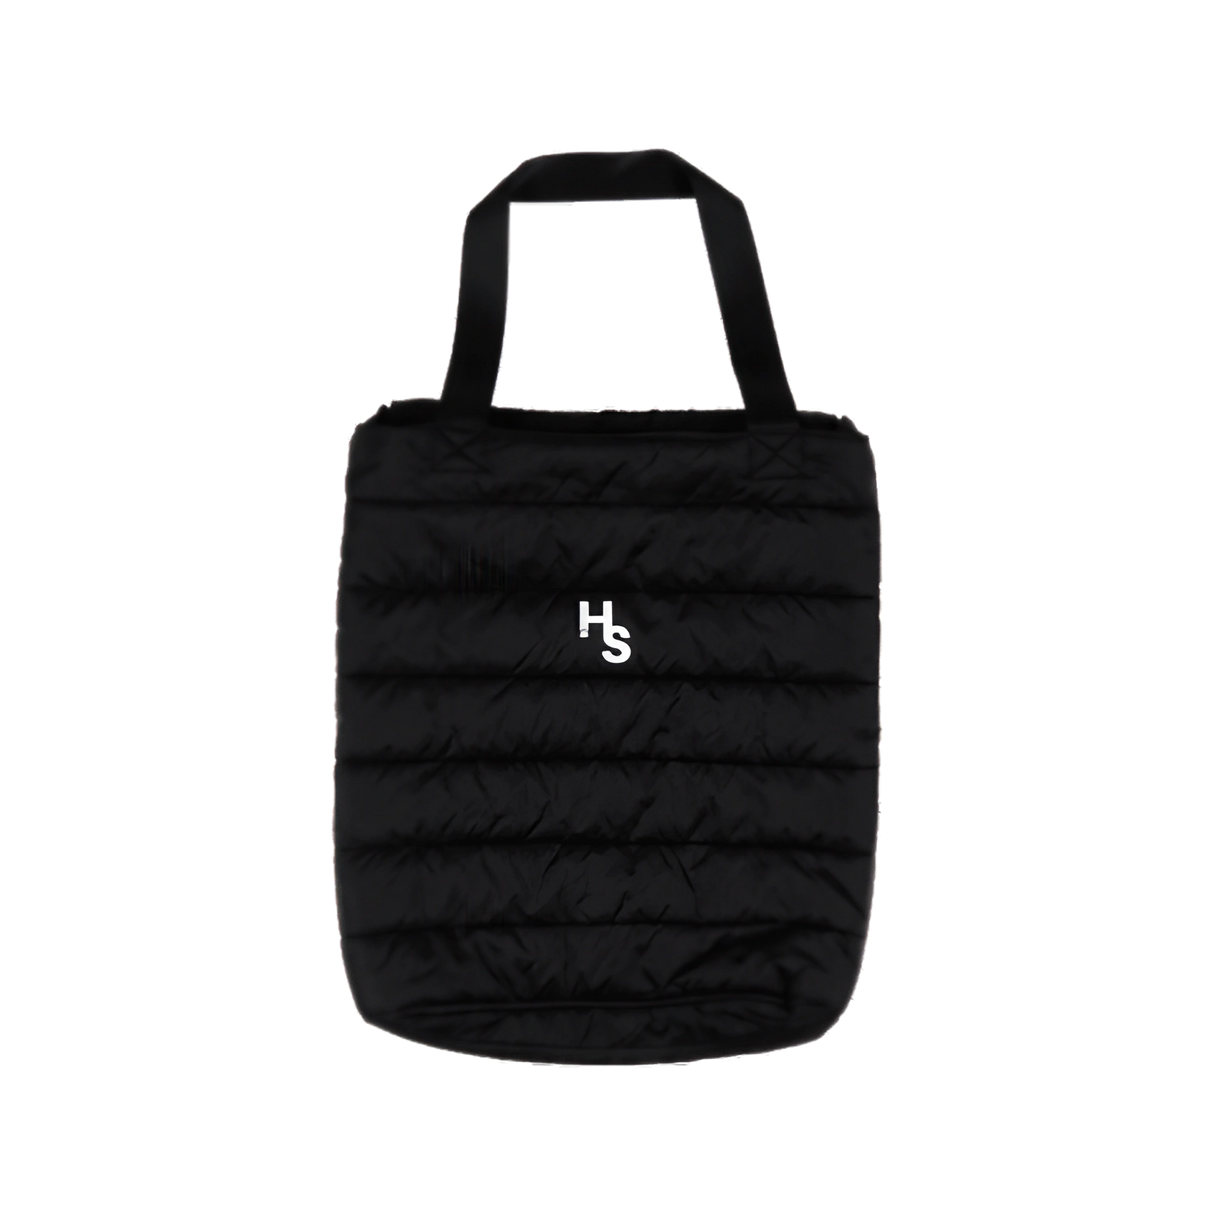 Higher Standards black quilted tote bag with white logo, front view on a seamless background